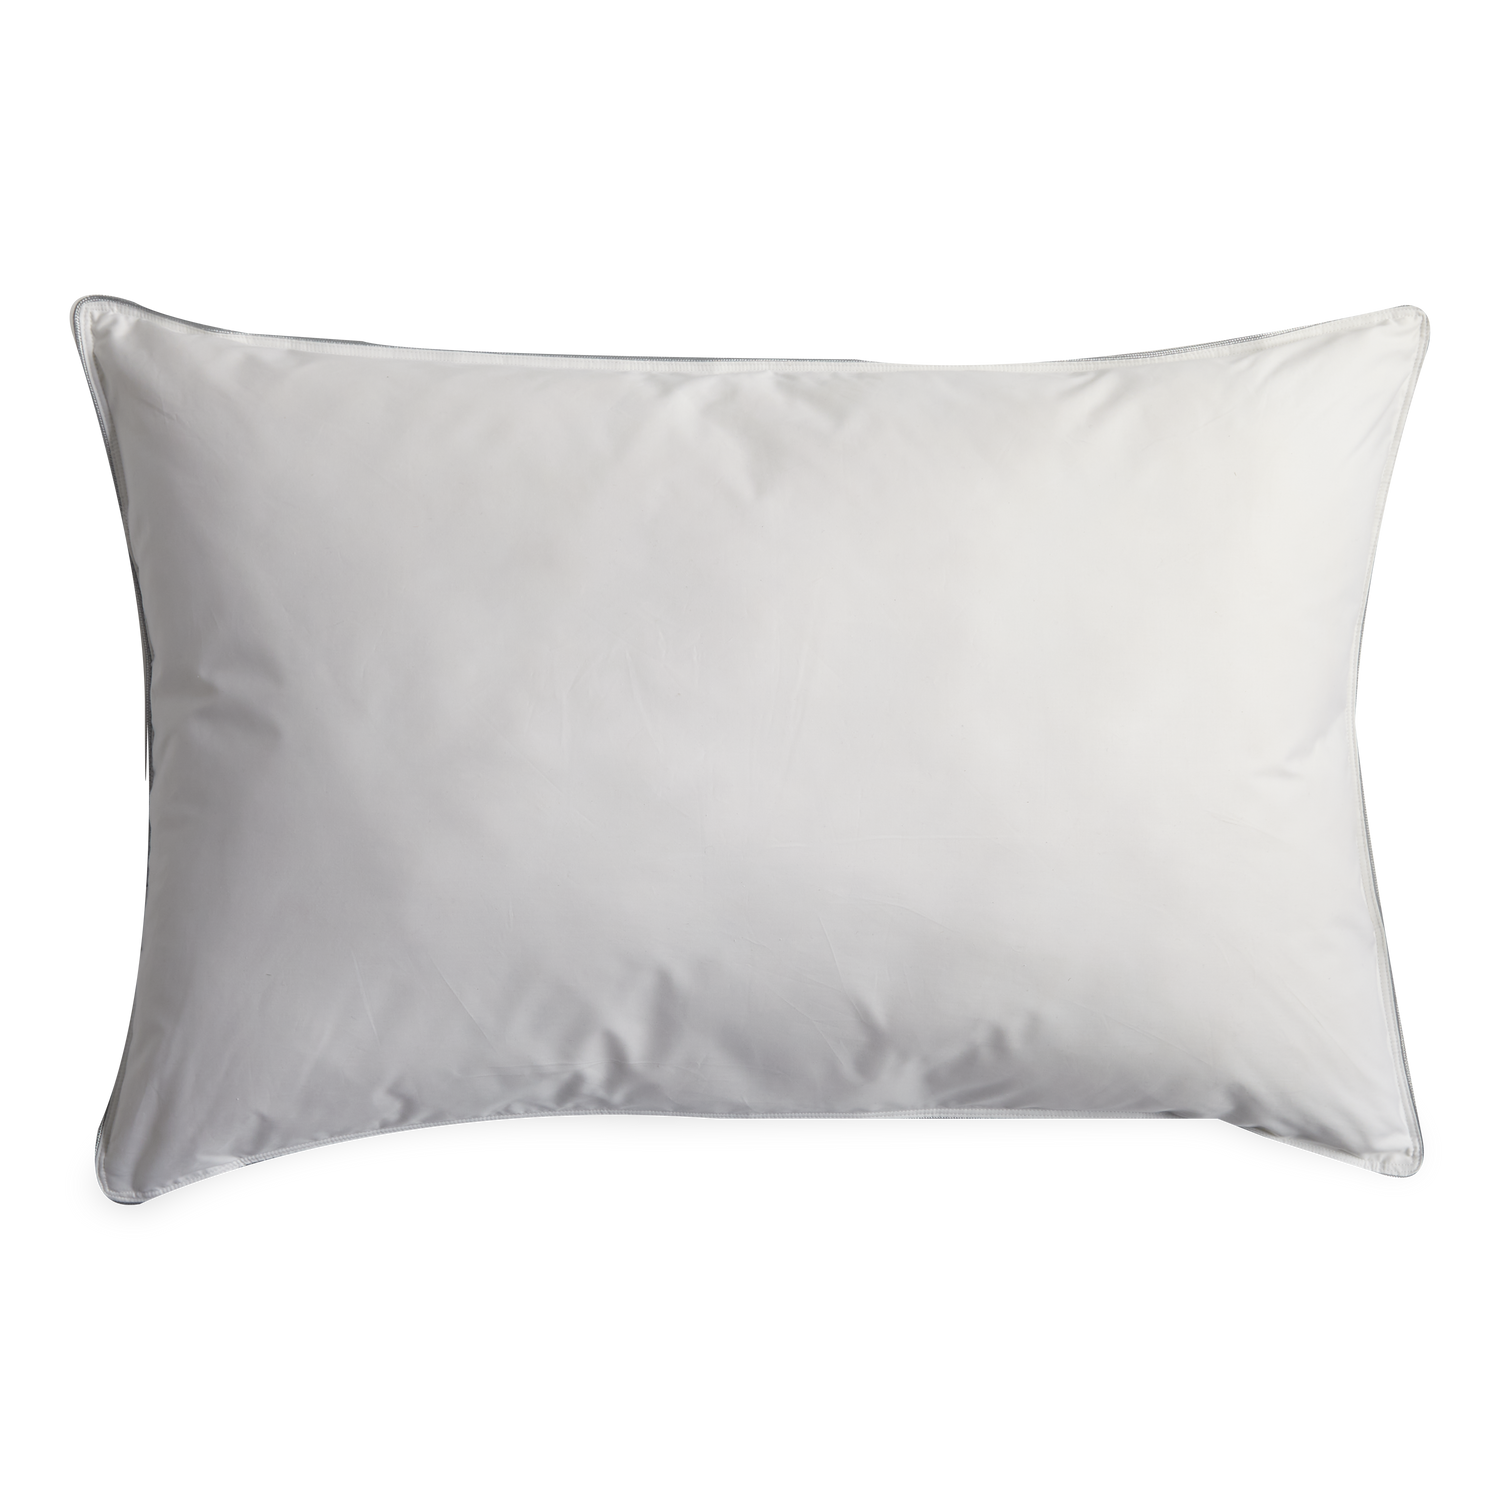 Soft and comfortable, our down alternative pillow is designed to mimic the feeling of down while remaining hypoallergenic.